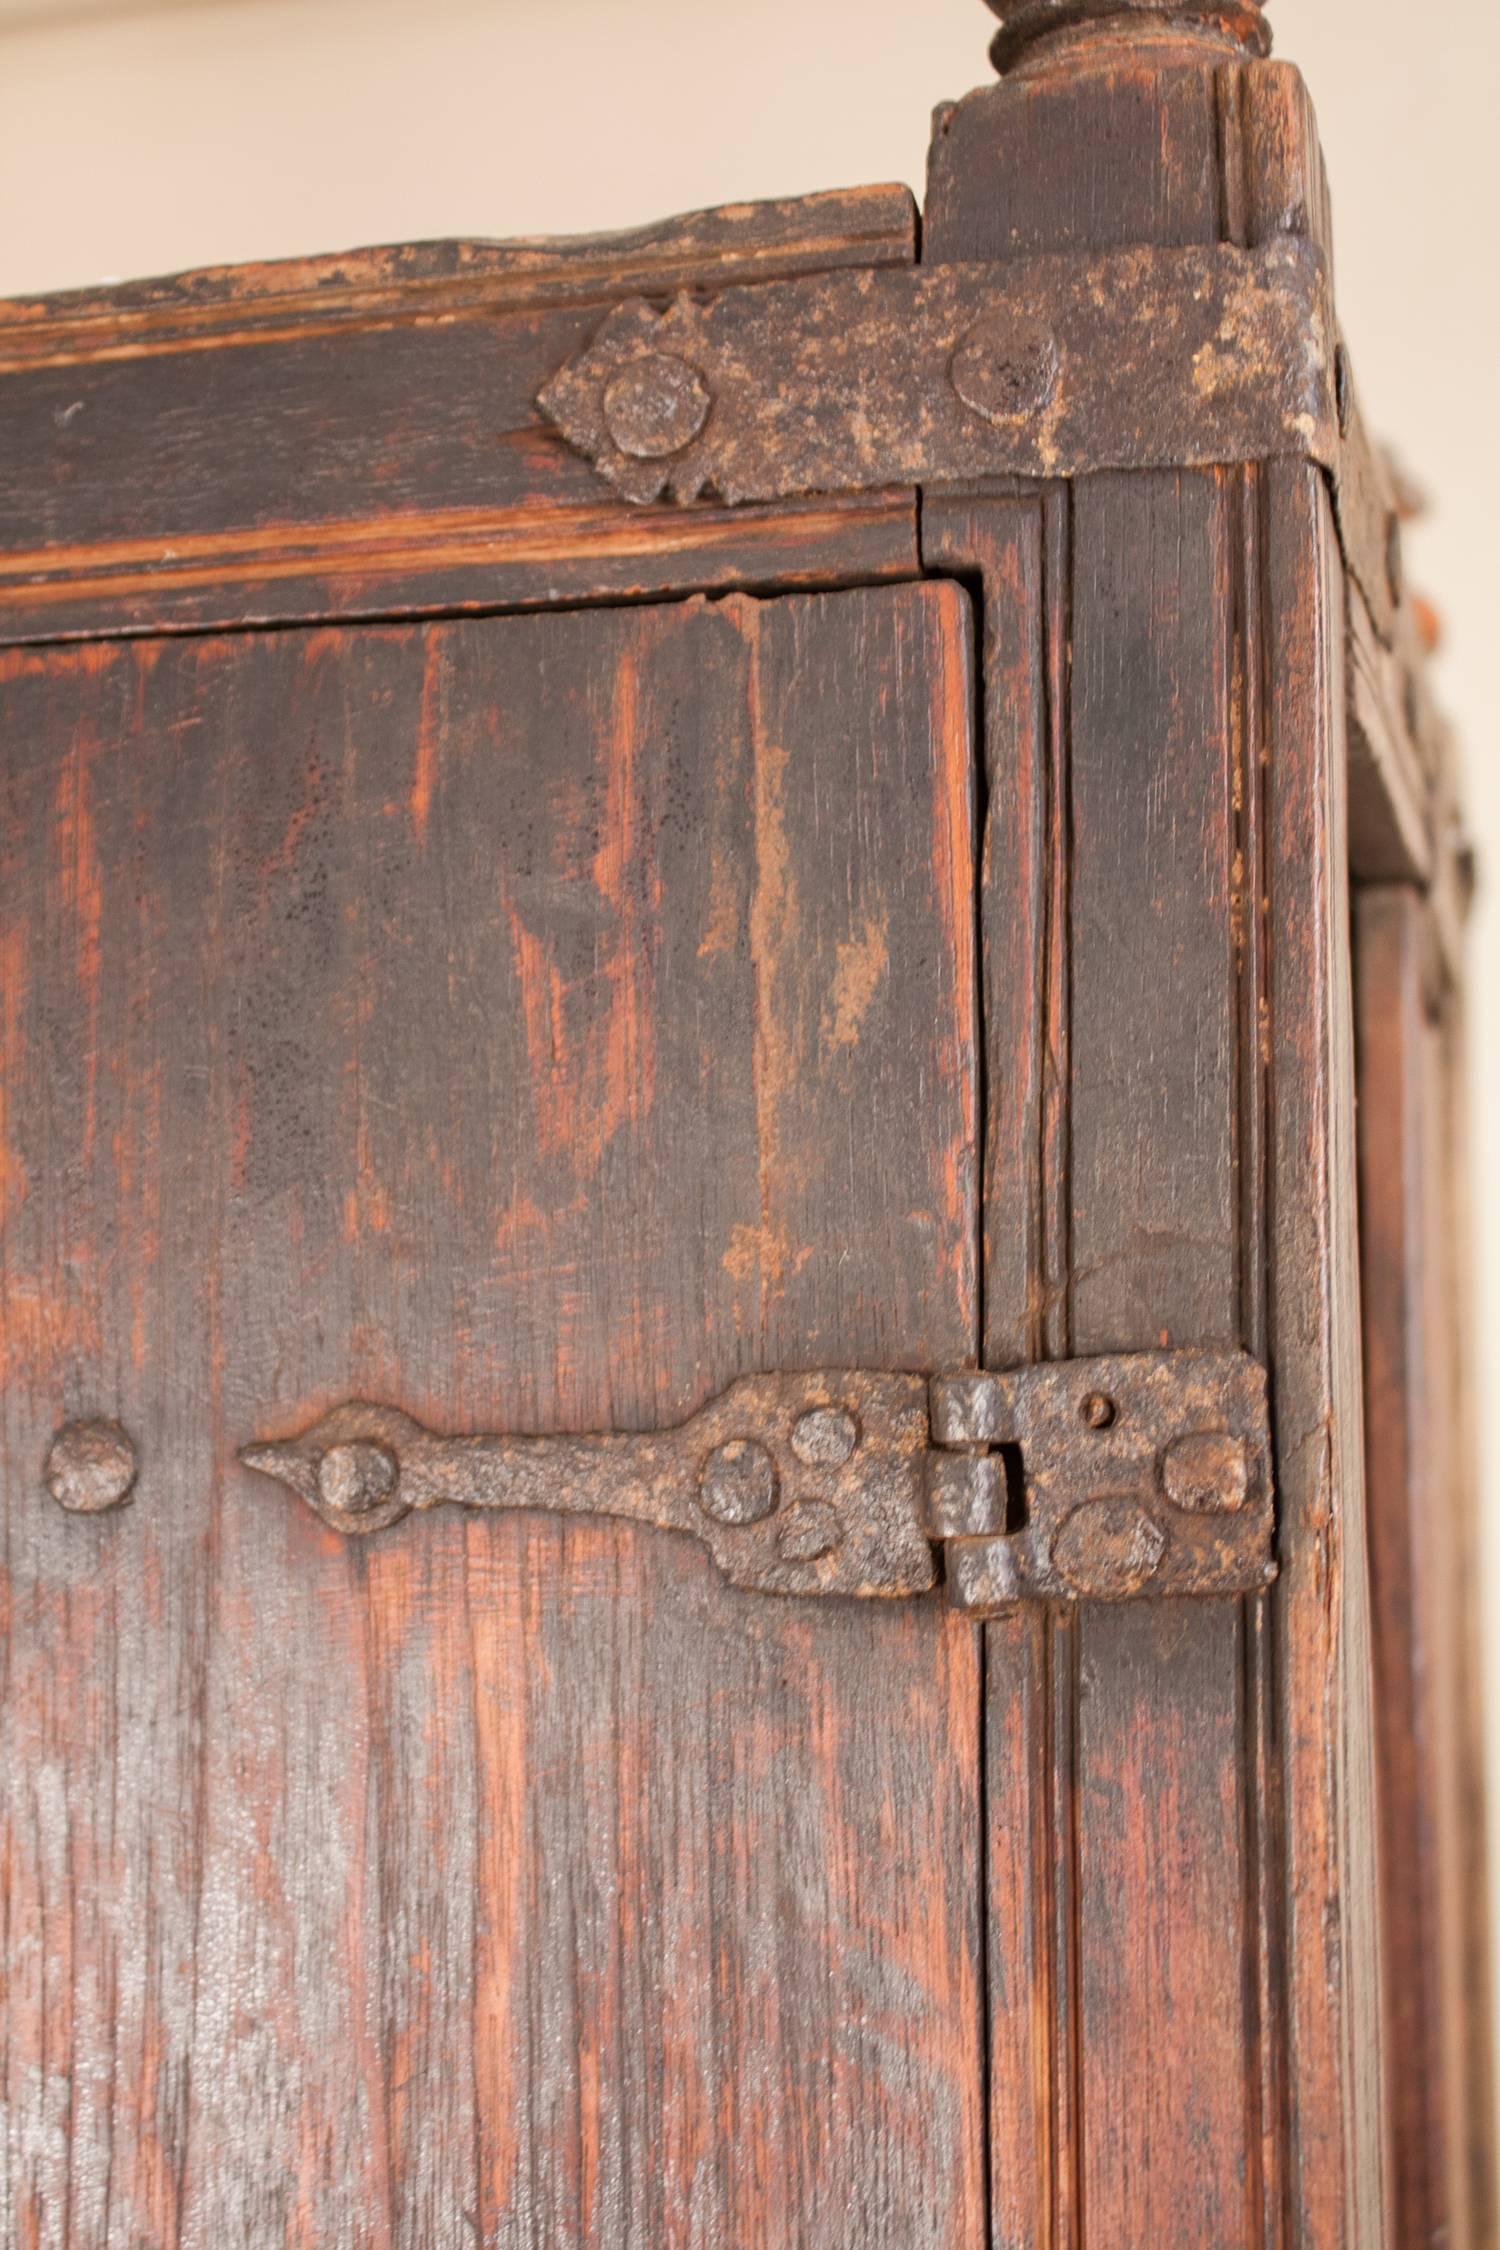 Iron Rustic Wood Cabinet from Goa, India